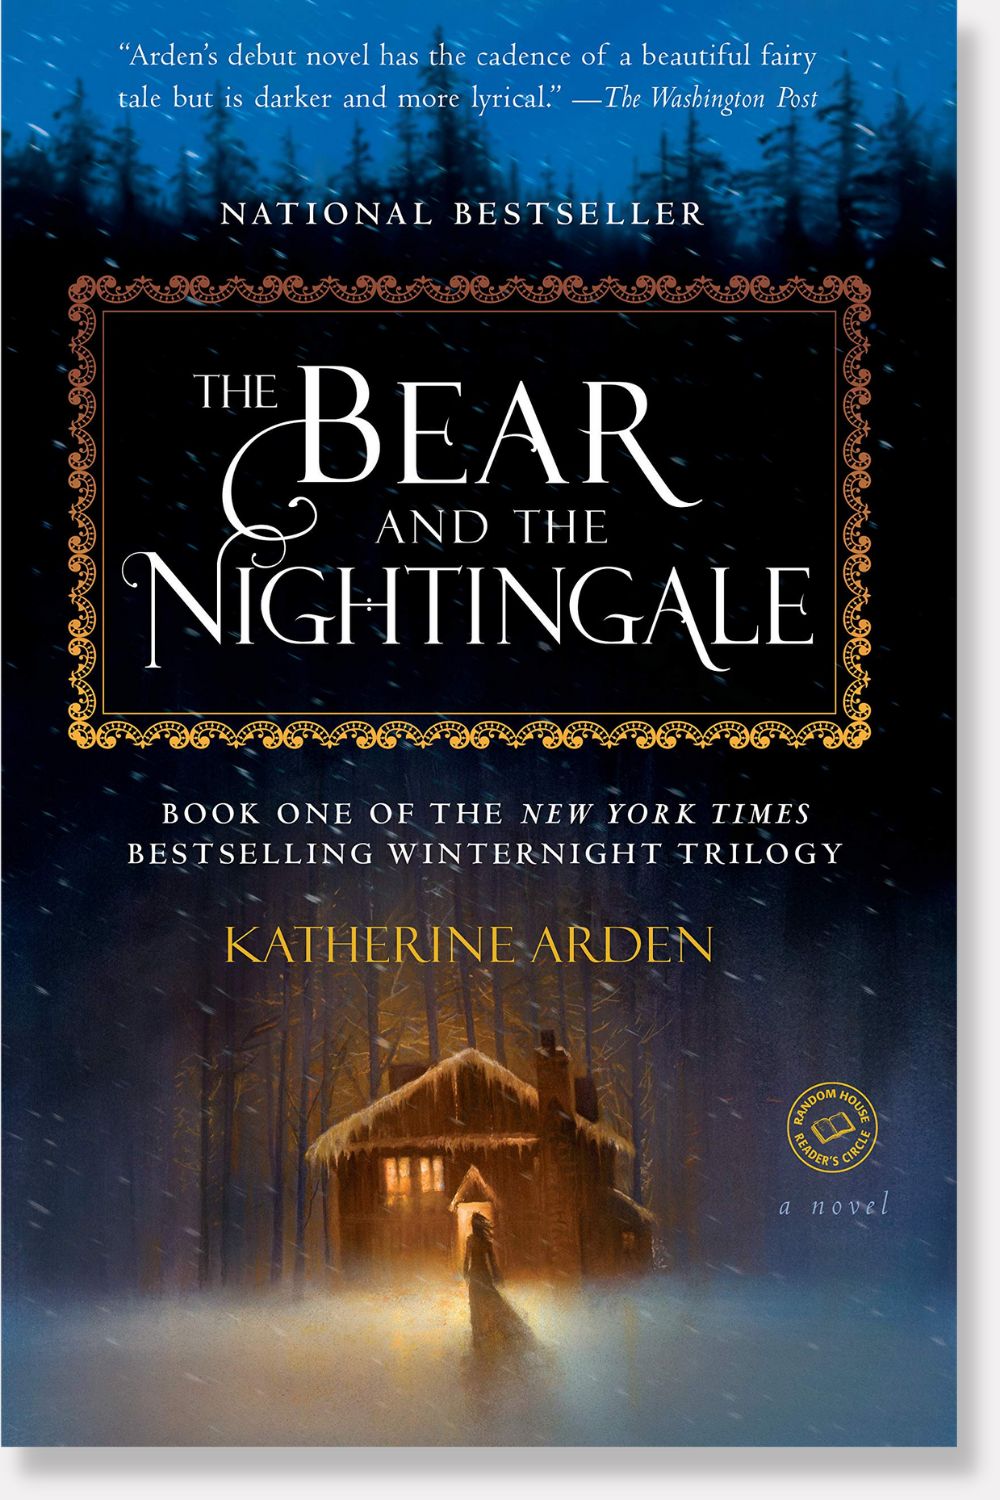 The Winternight Trilogy by Katherine Arden - book cover